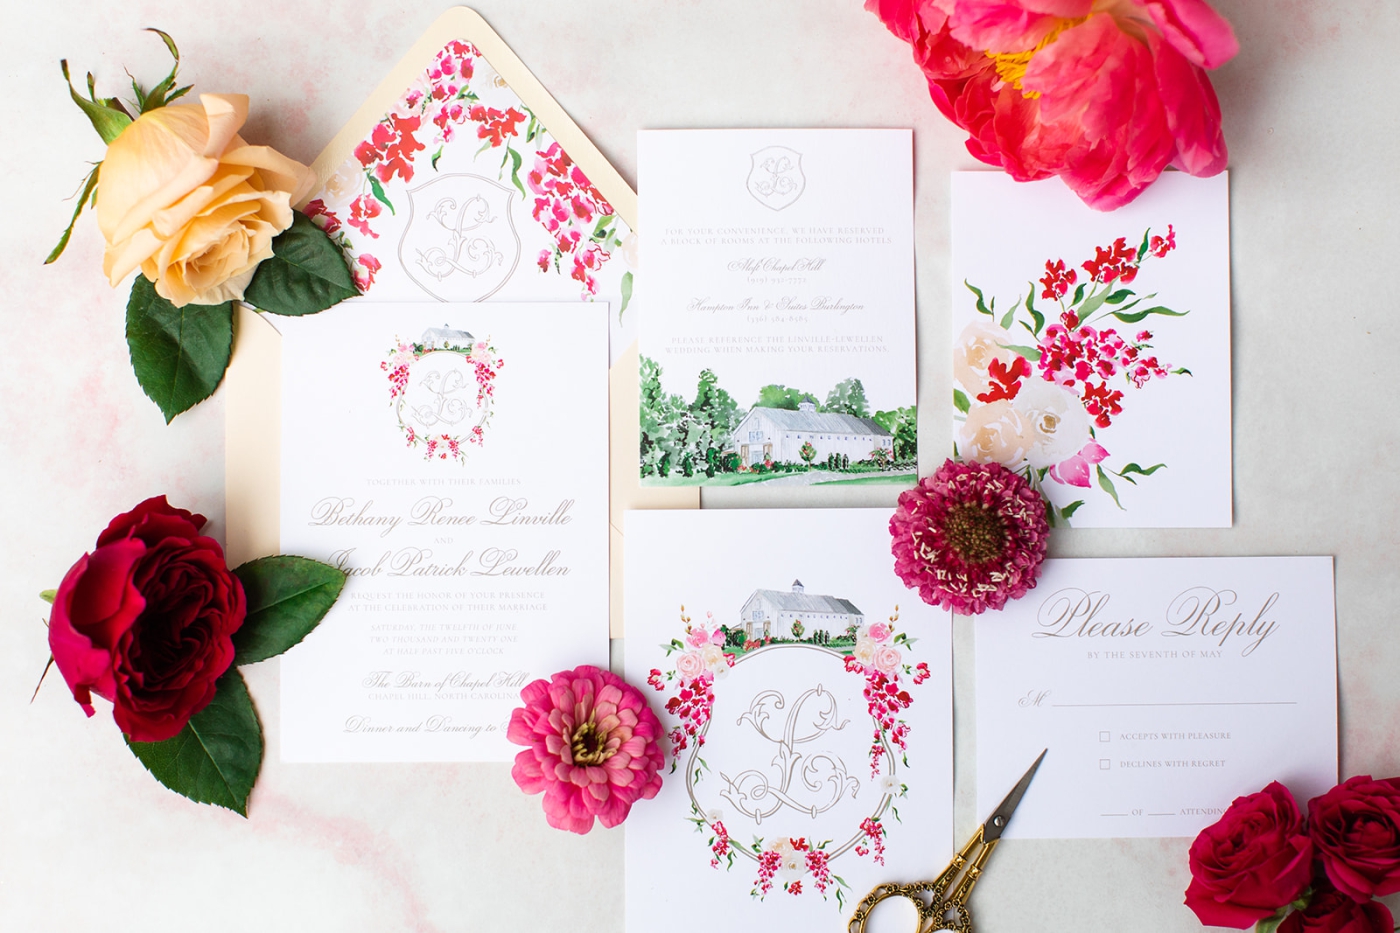 How to add your wedding flowers to your invitations